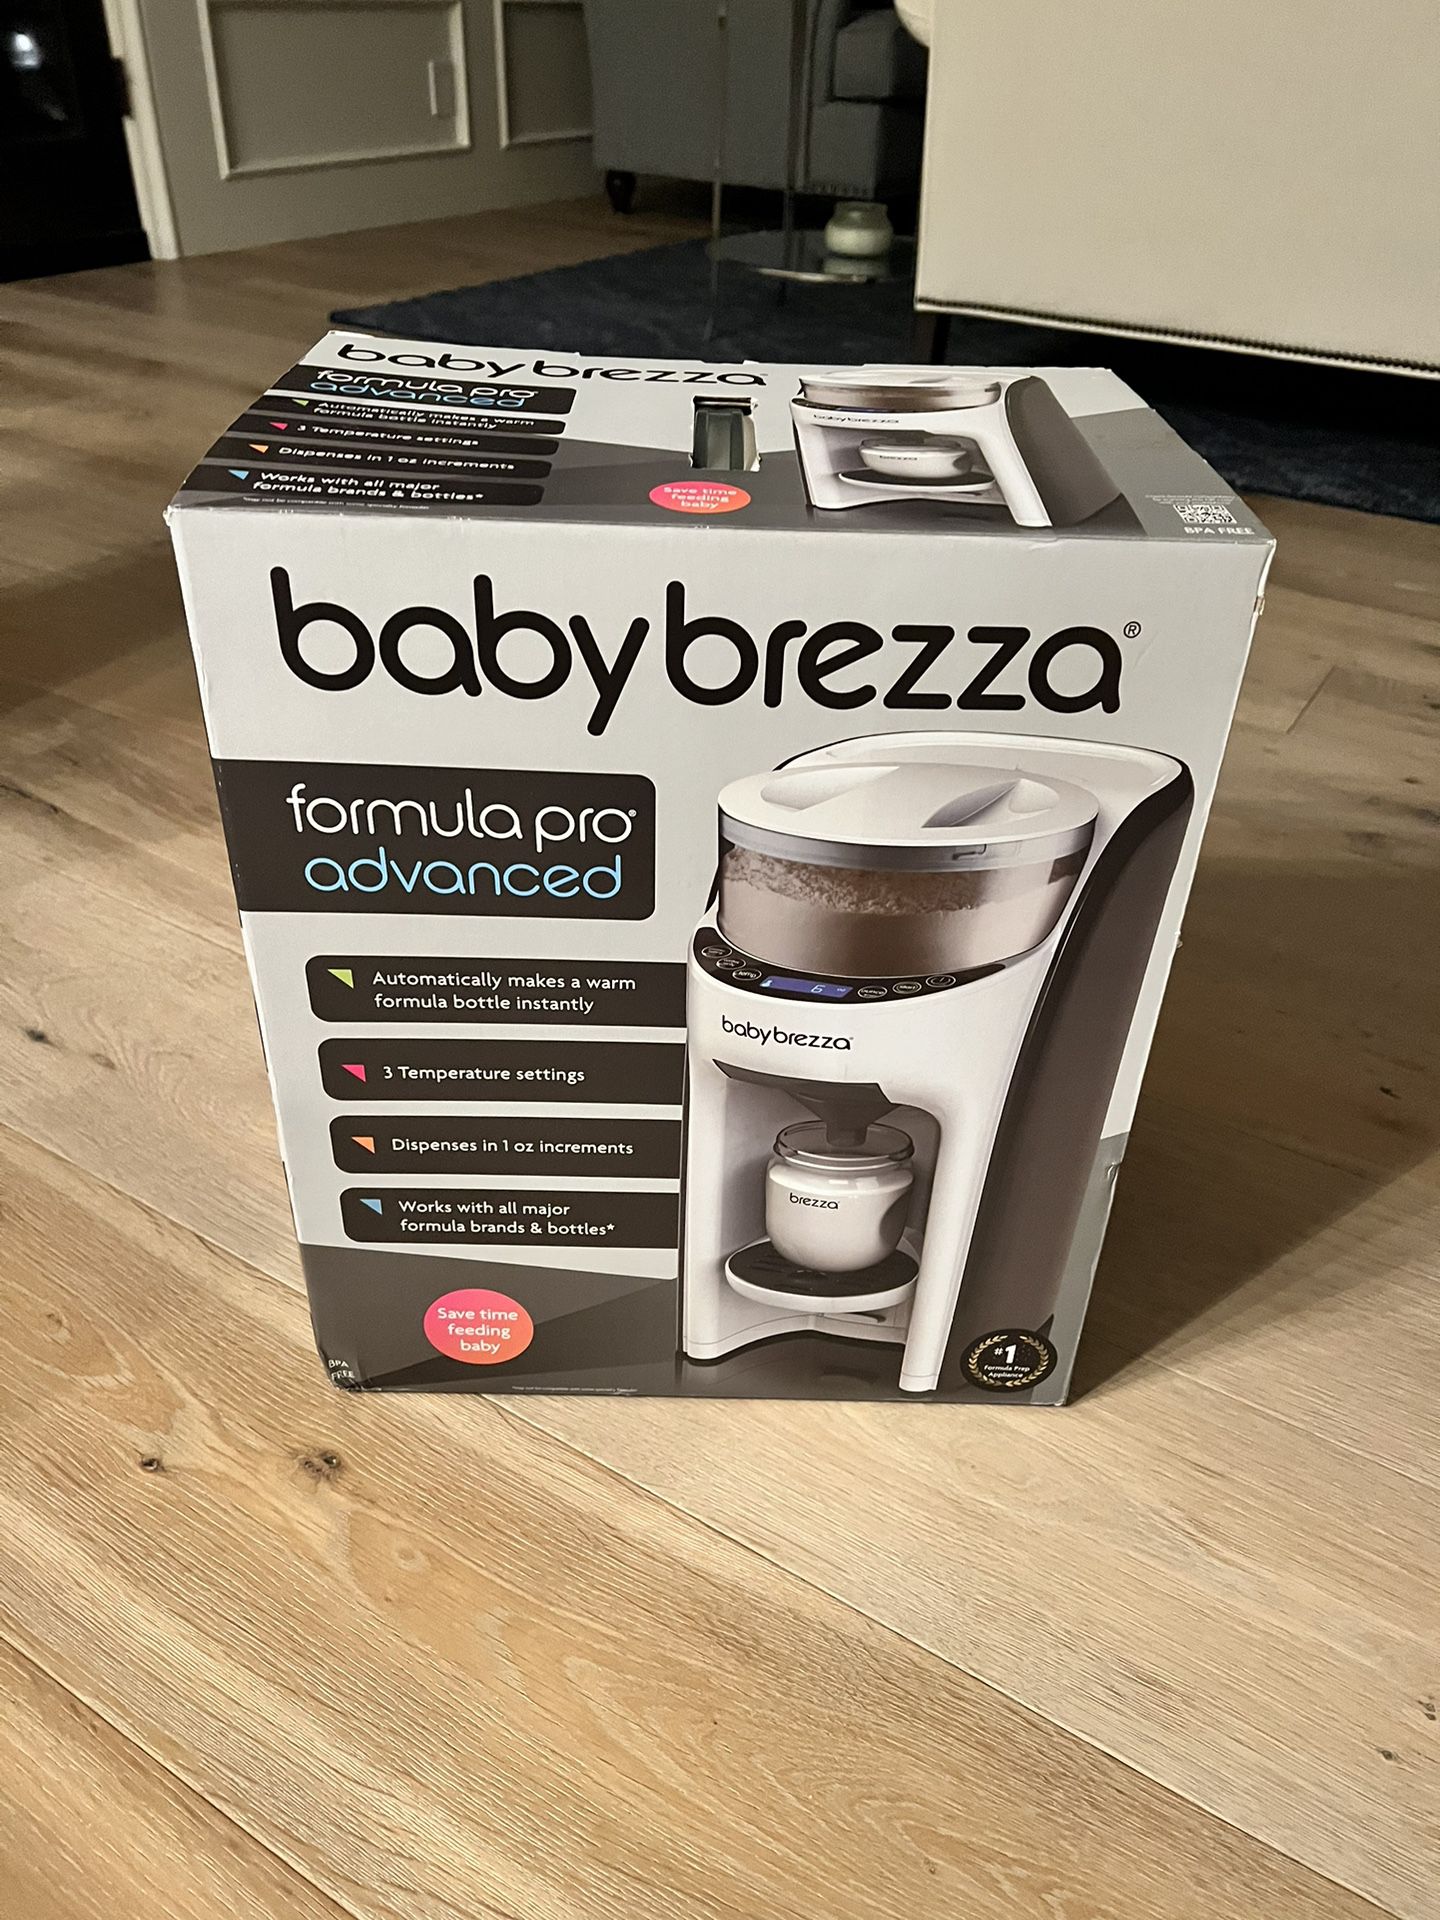 NEW In Box Baby Brezza- Never Been Used 